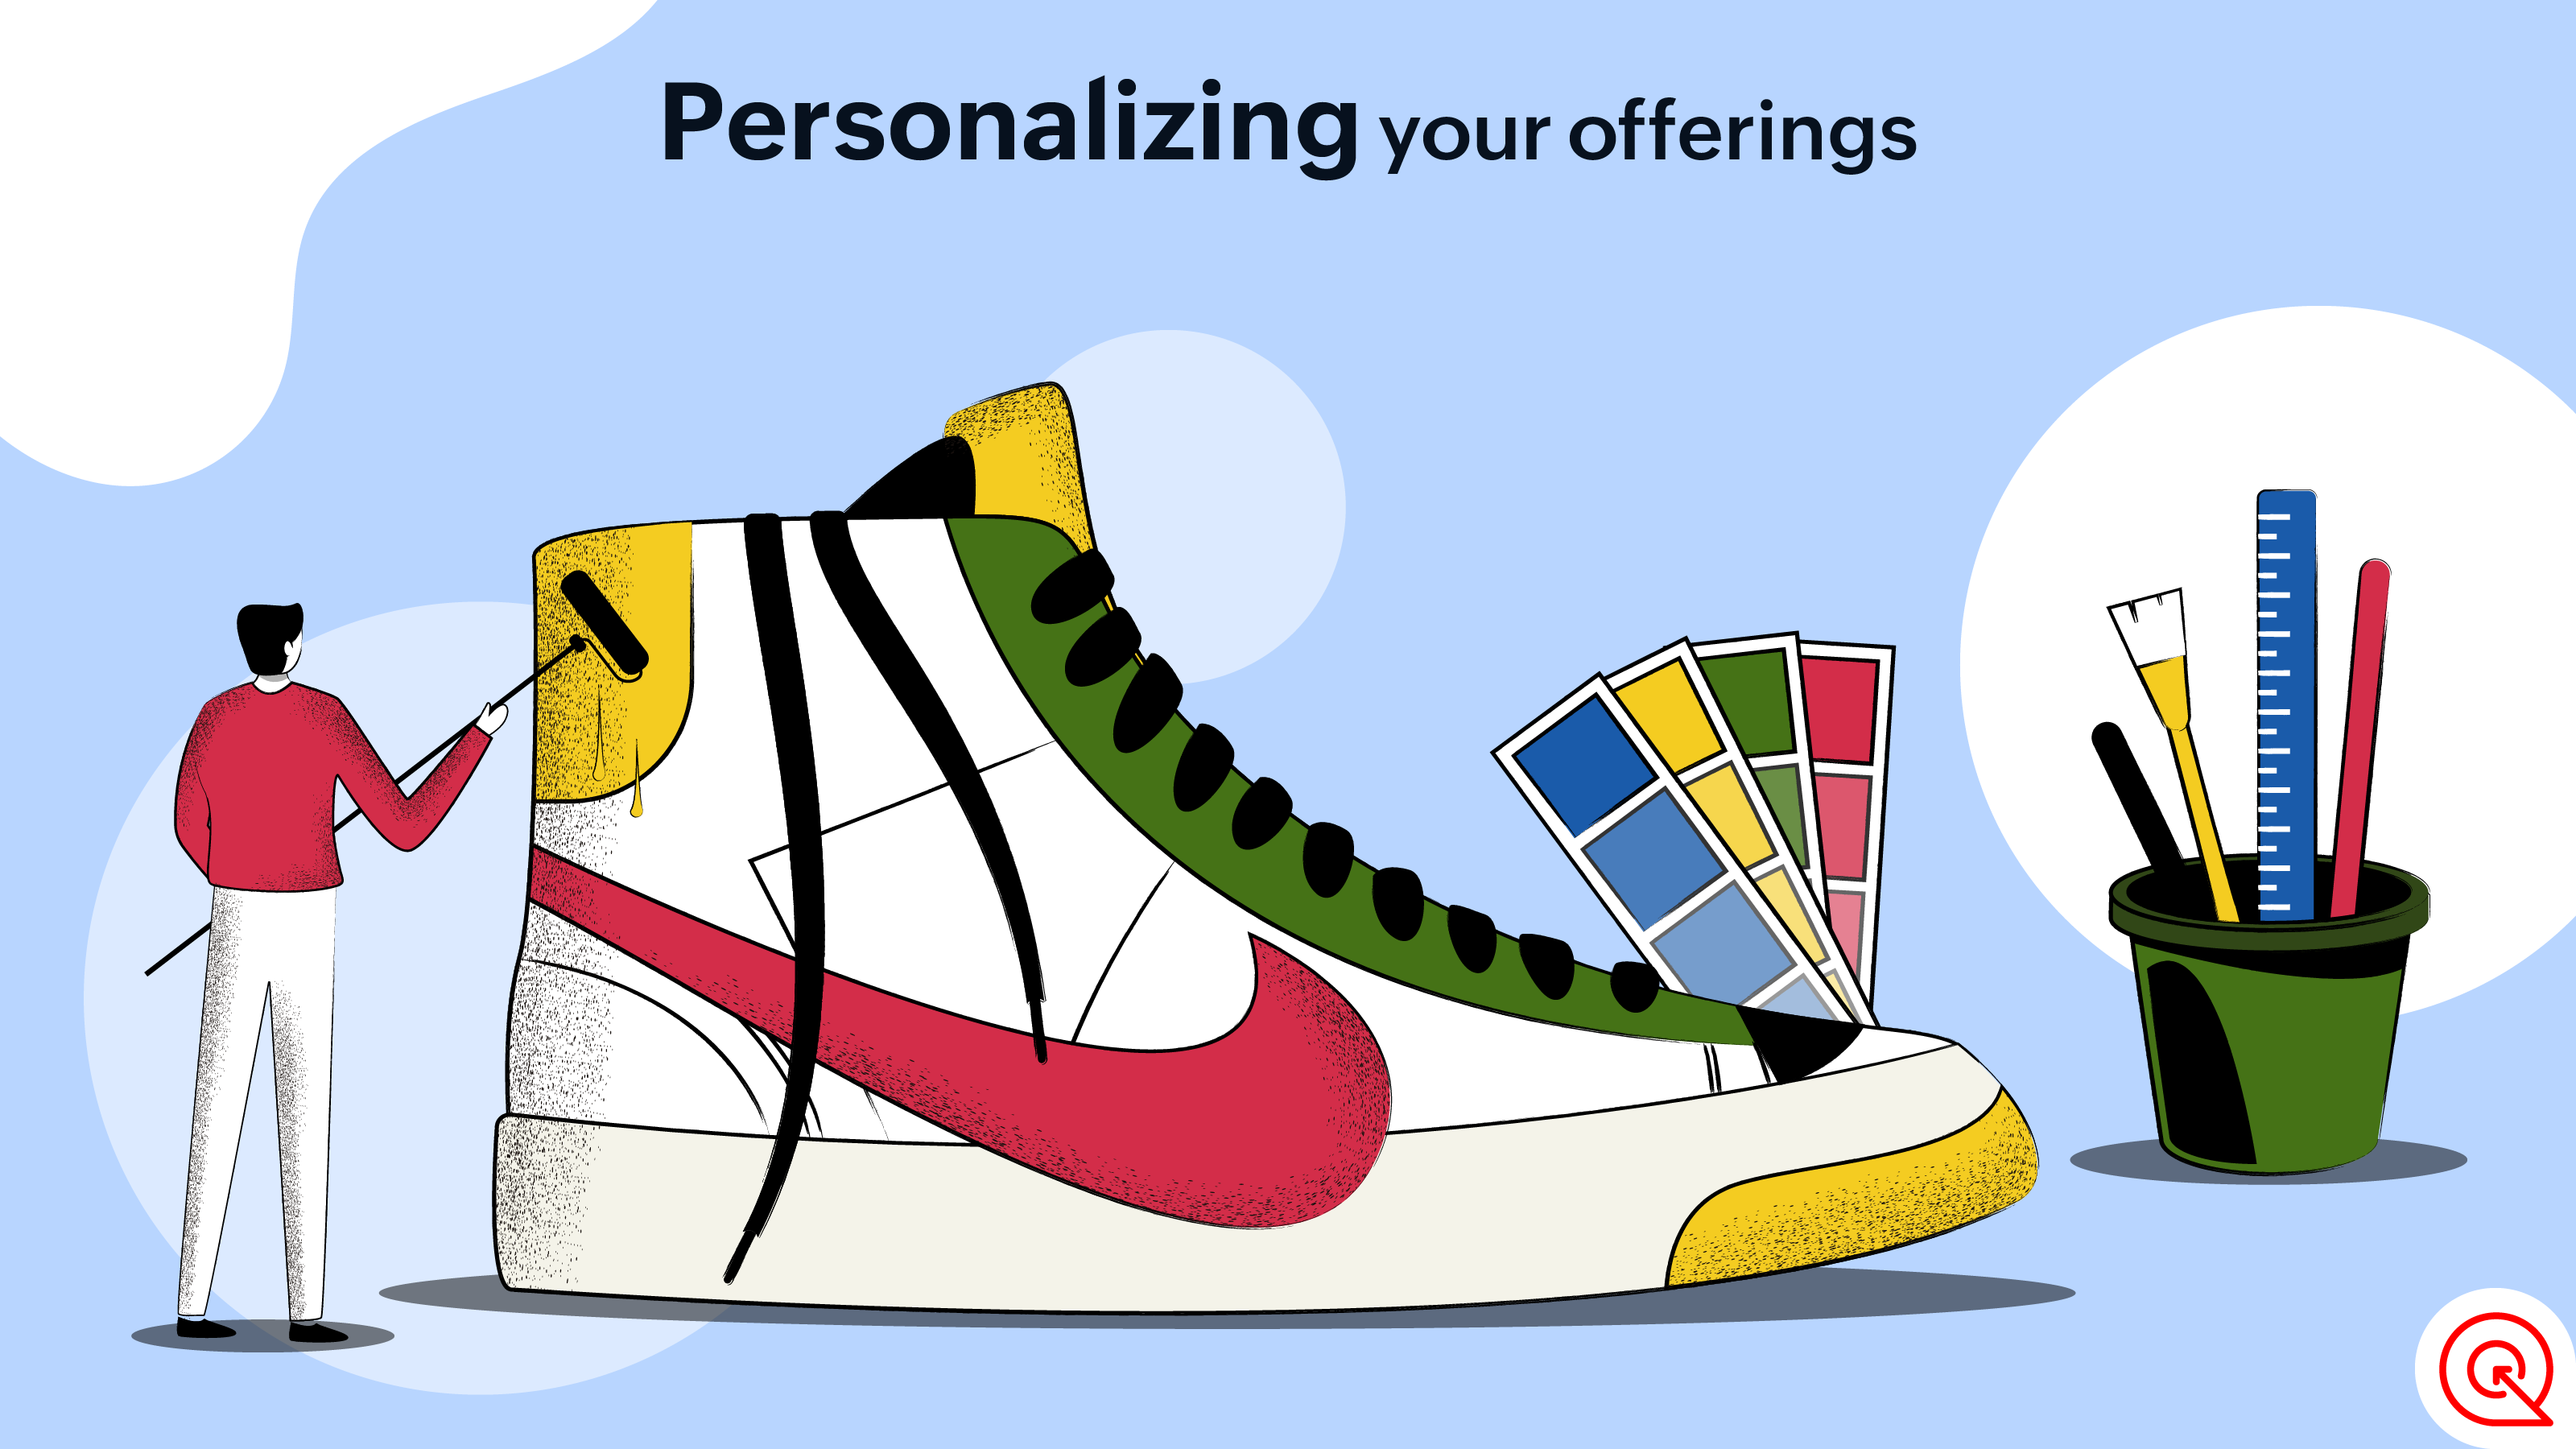 Personalizing your offerings as a brand engagement strategy